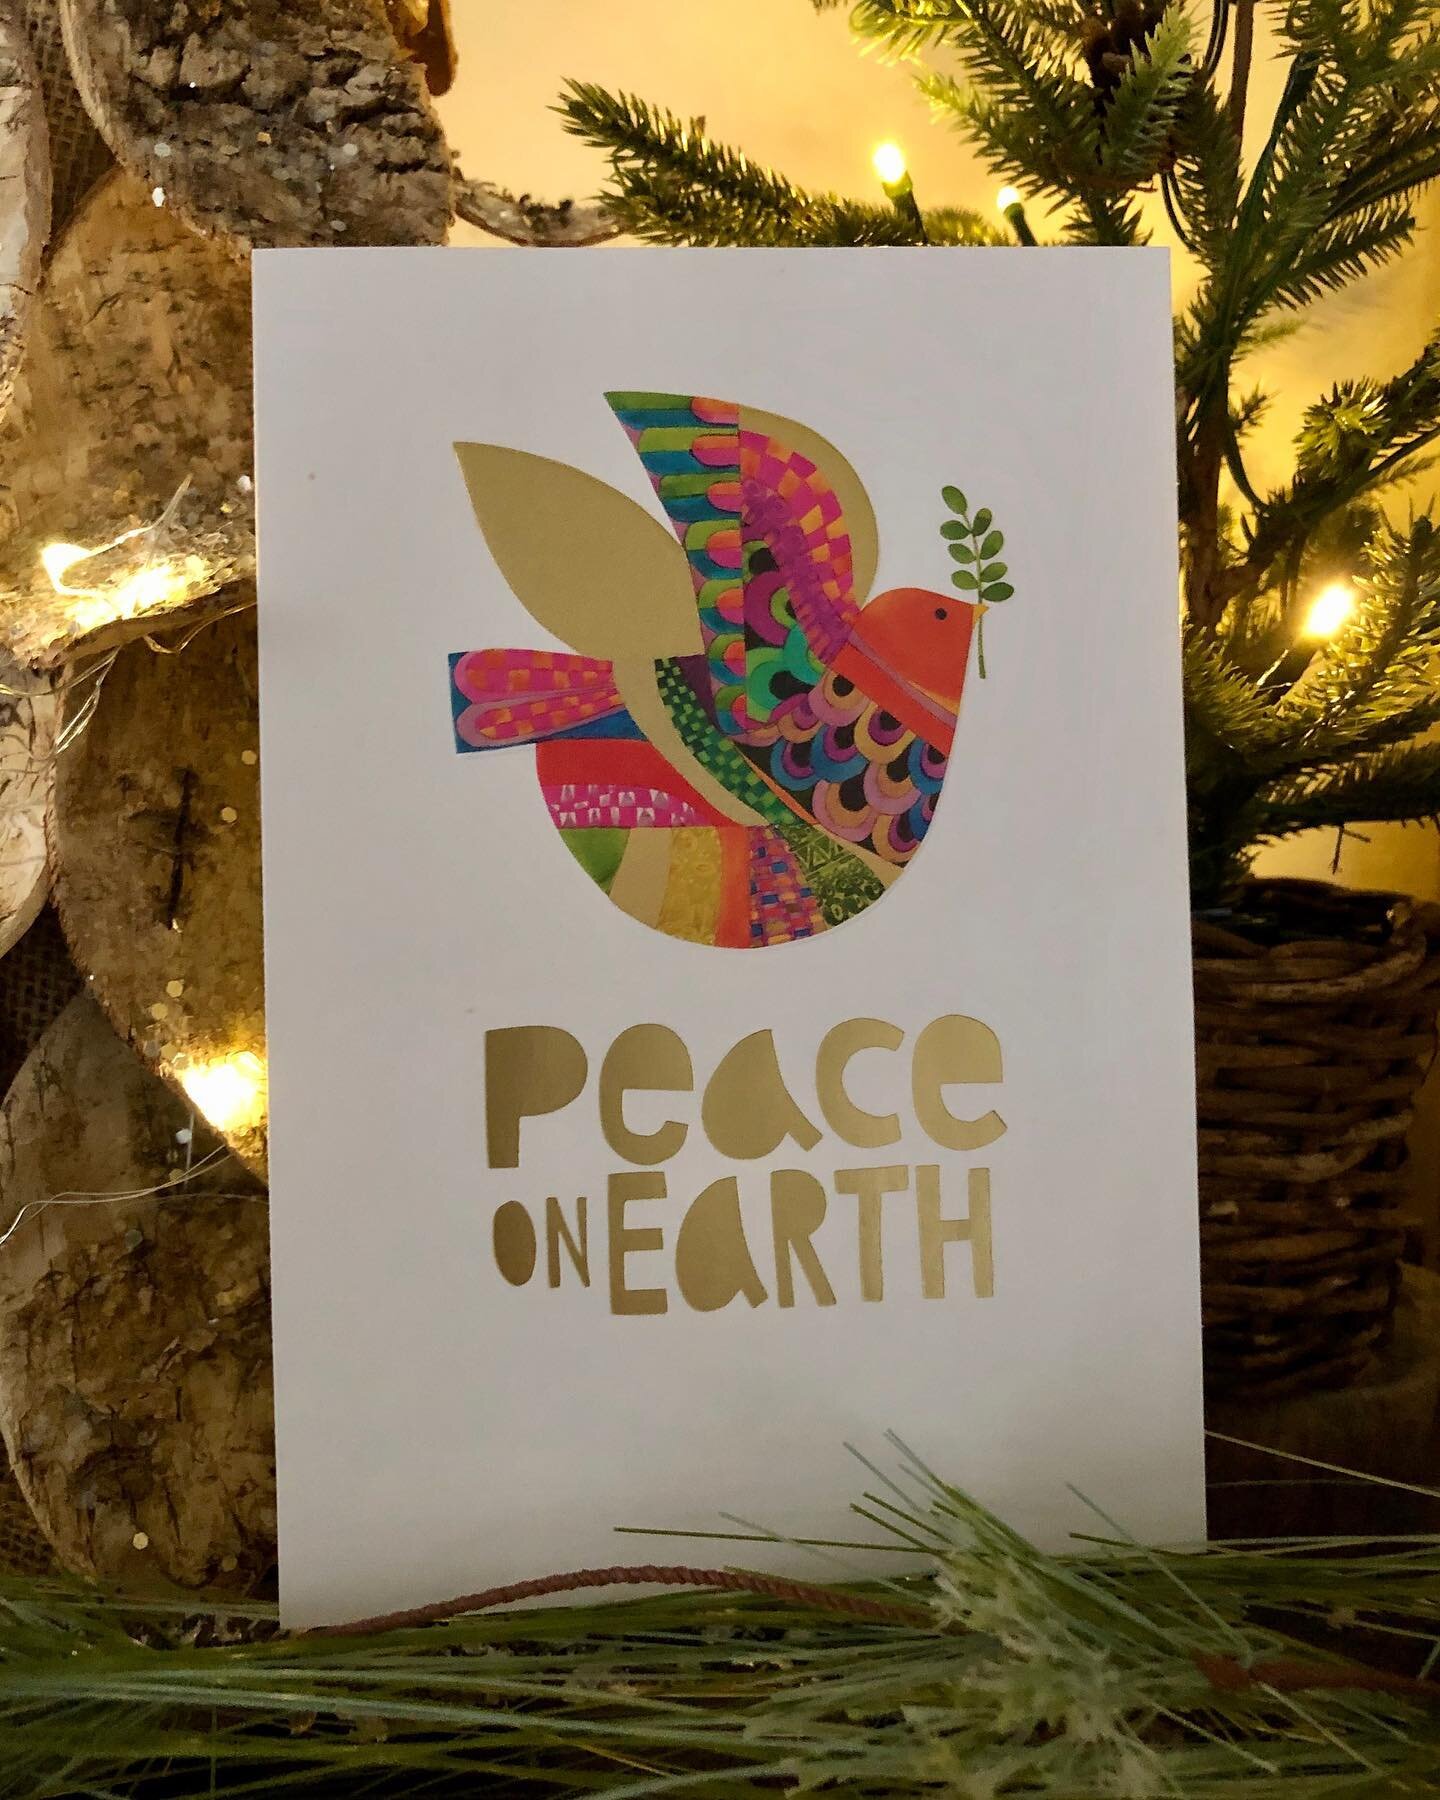 My dear Type 9 friend, @thebradshawdrafts gave us this beautiful card sharing the sentiment of Type 9 for all of us - &ldquo;Let all the world welcome this season of peace.&rdquo;
What is your message for this season?
.
.
#enneagram #enneagramtypes #